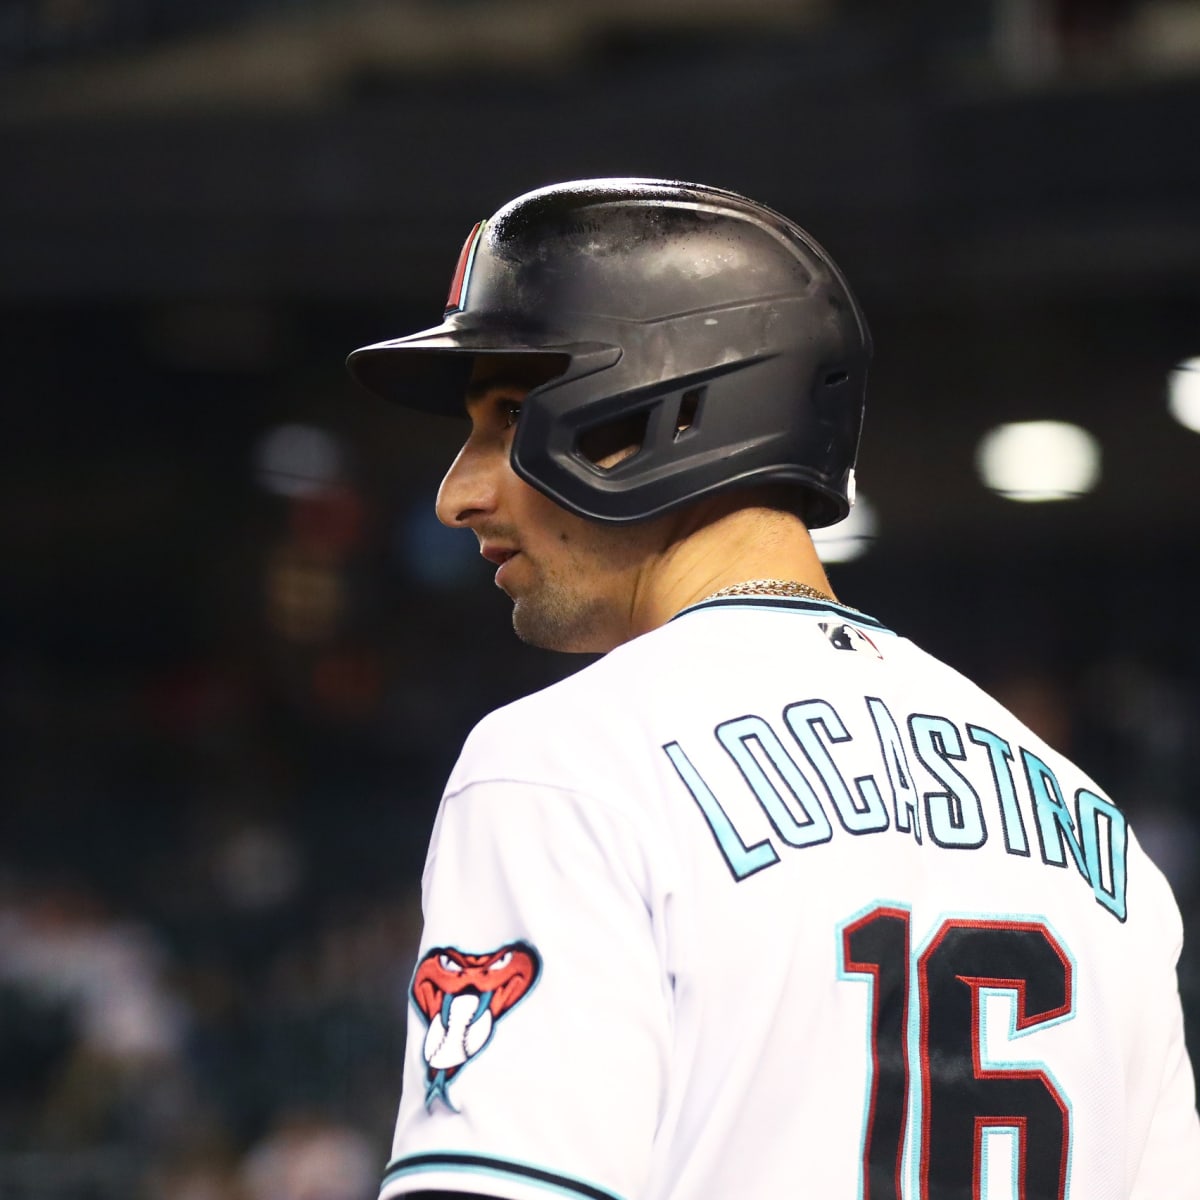 Tim Locastro: What to know about New York Yankees outfielder in trade